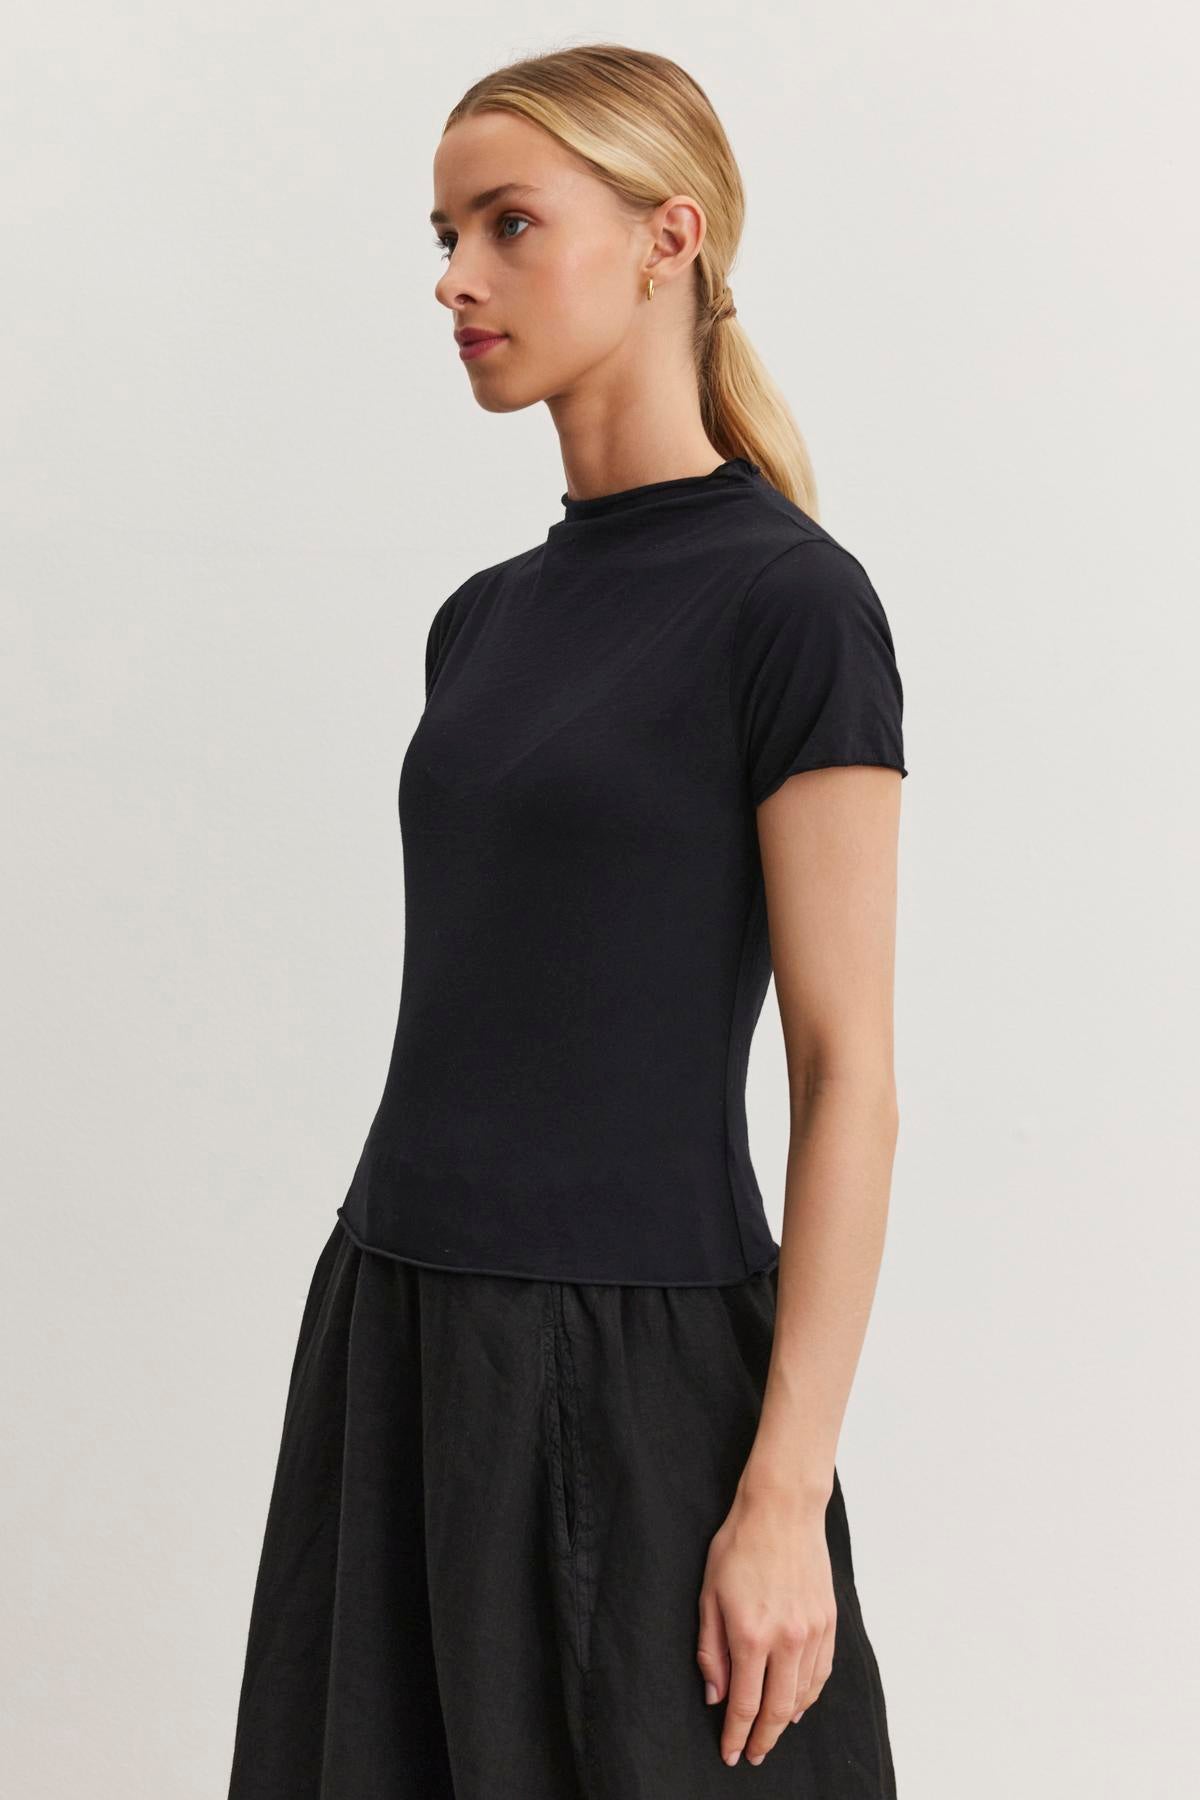   A woman with blonde hair tied back in a ponytail is wearing a black JACKIE MOCK NECK TEE by Velvet by Graham & Spencer and a matching black skirt, both showcasing a fitted cropped silhouette, standing against a plain white background. 